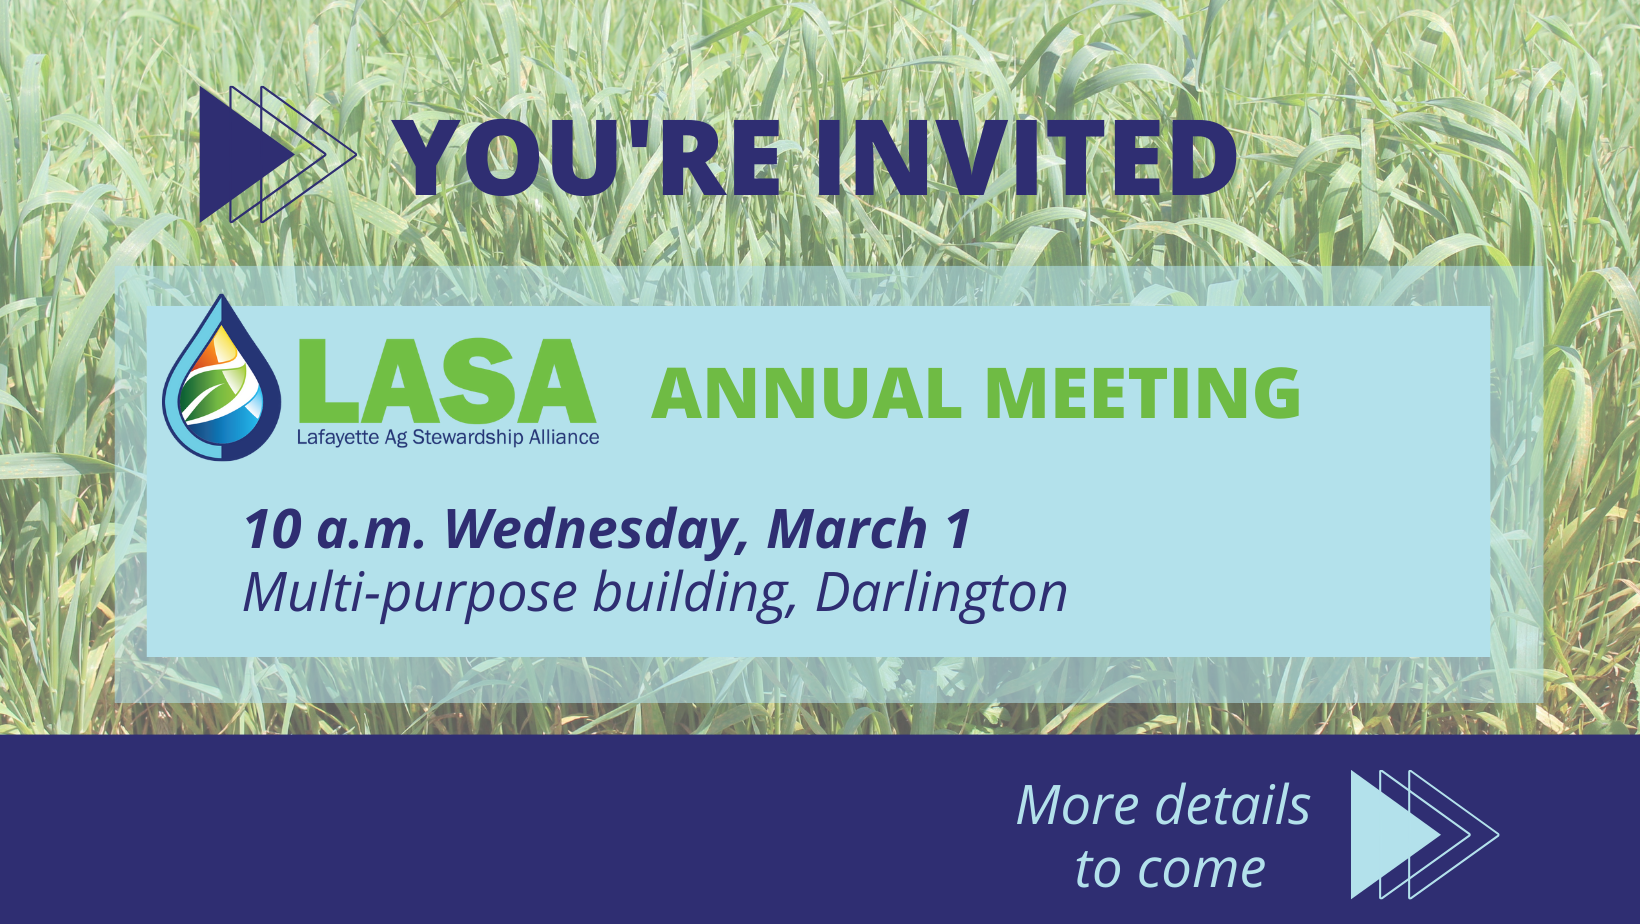 LASA annual meeting save the date